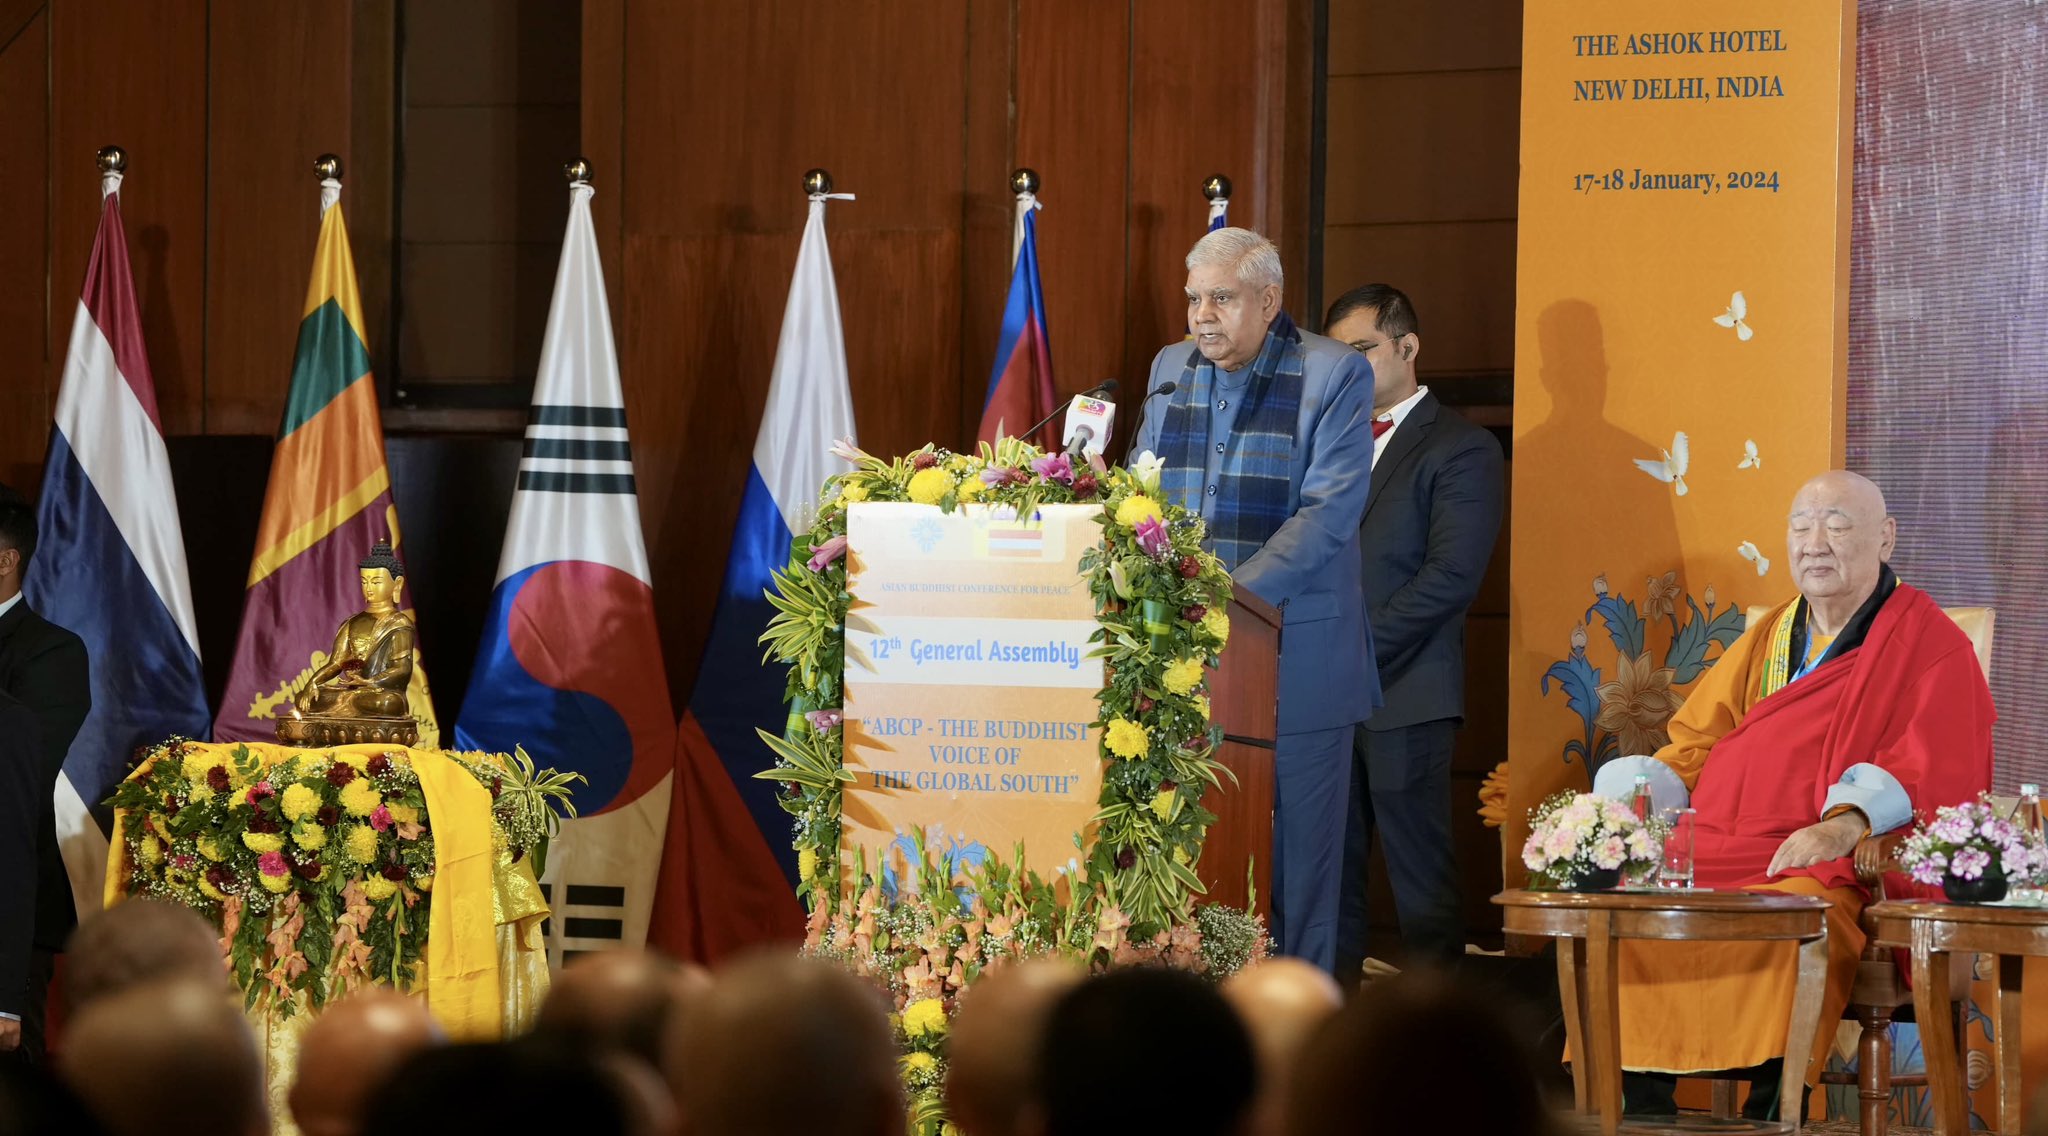 The  Vice-President, Shri Jagdeep Dhankhar addressing the 12th General Assembly of the Asian Buddhist Conference for Peace (ABCP), in New Delhi  January 17, 2024.